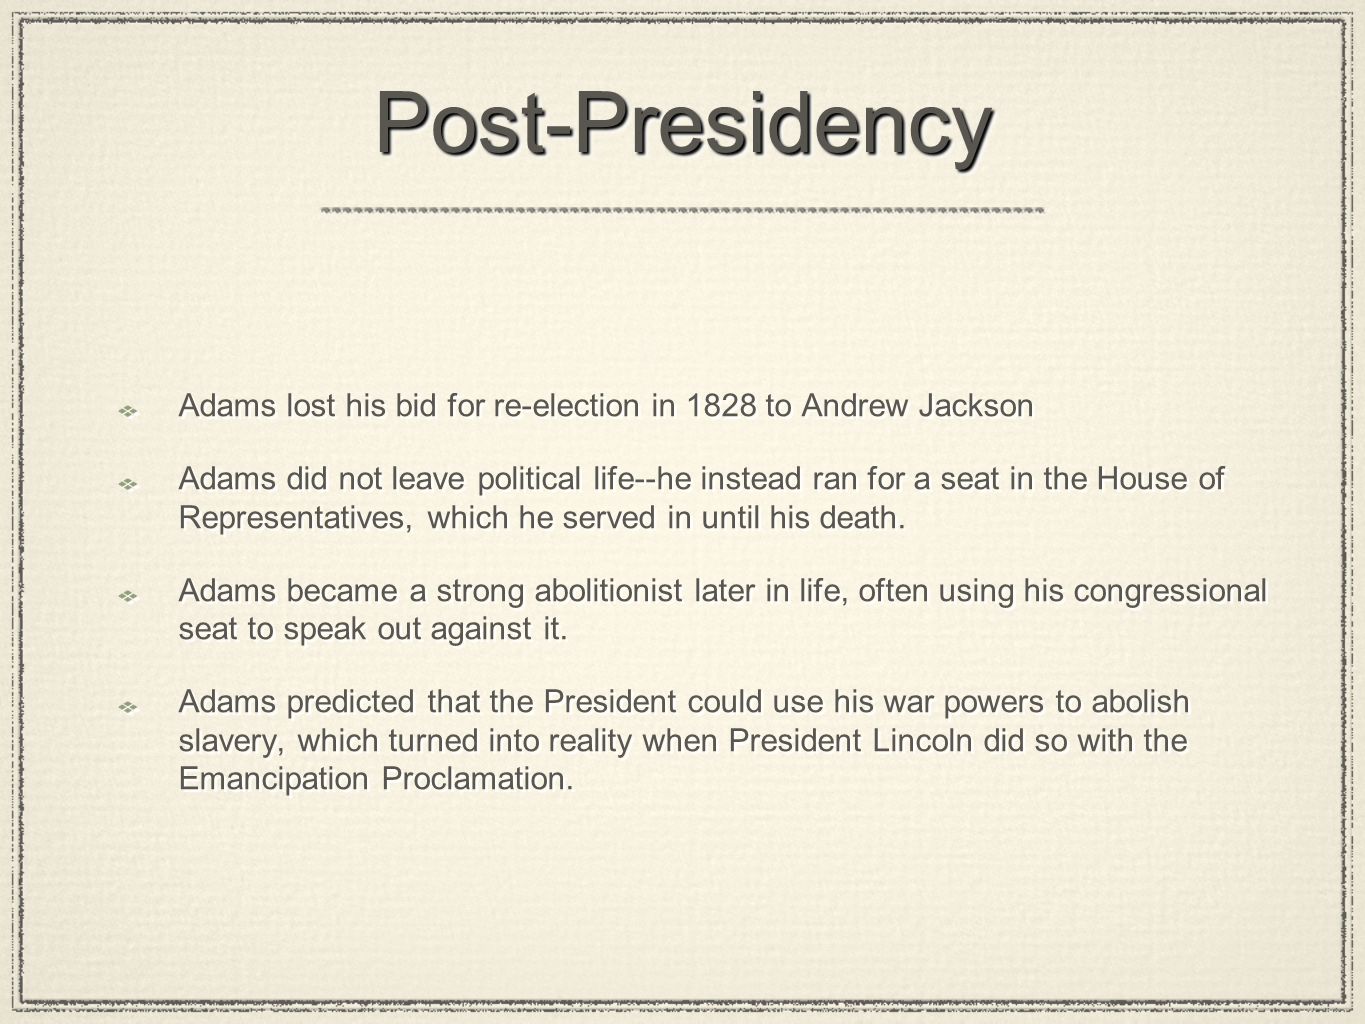 Post-PresidencyPost-Presidency Adams lost his bid for re-election in 1828 to Andrew Jackson Adams did not leave political life--he instead ran for a seat in the House of Representatives, which he served in until his death.